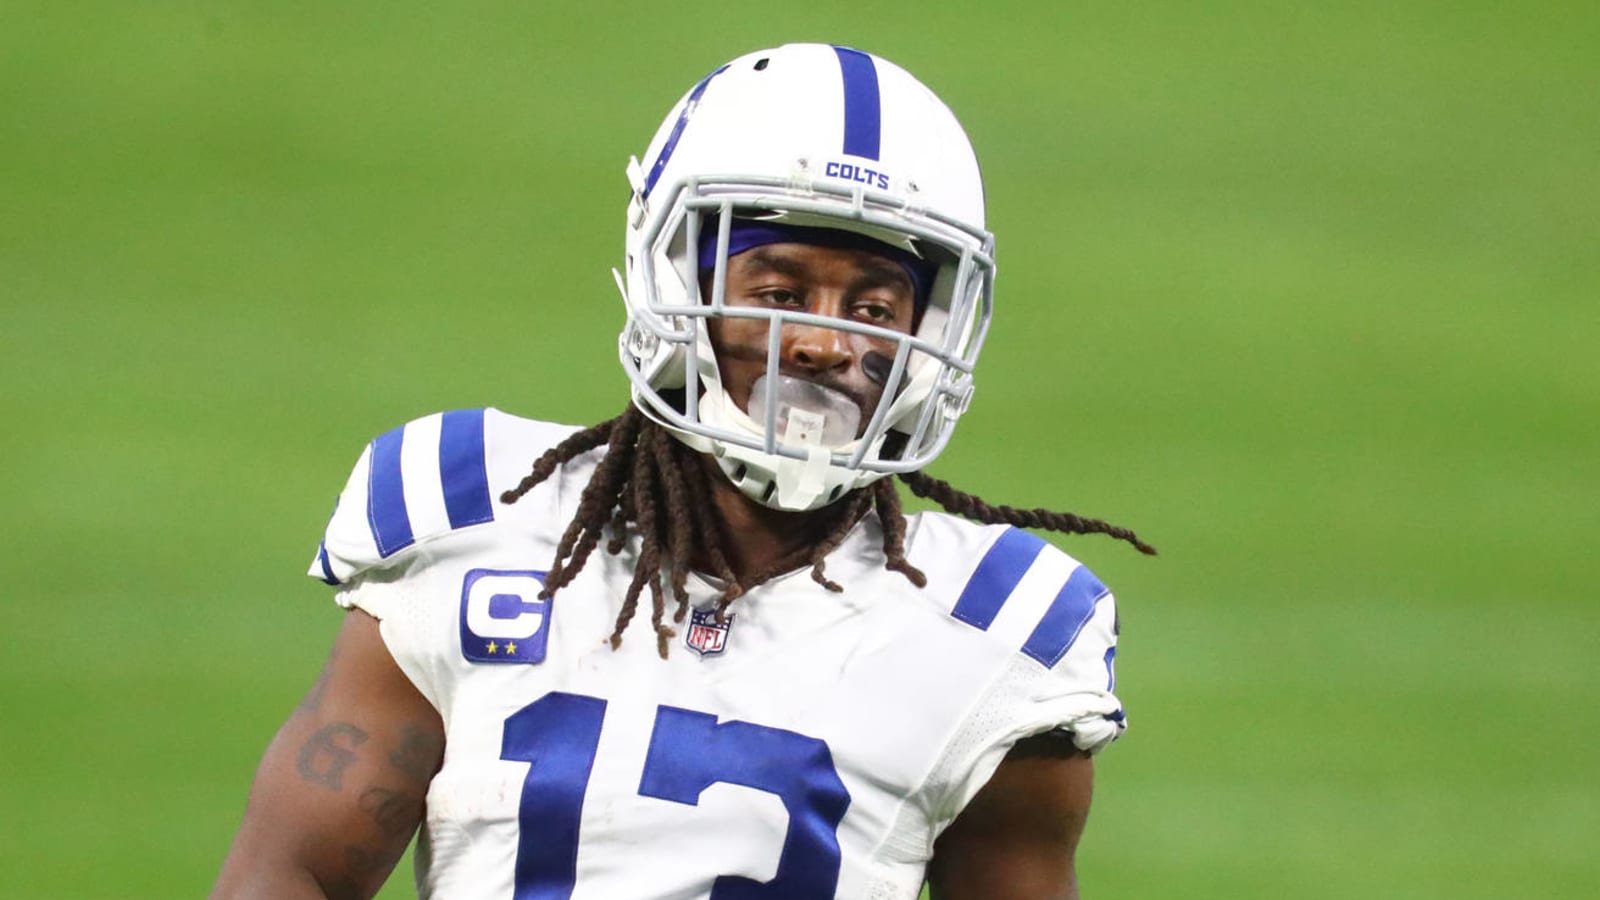 TY Hilton seems to signal he will be leaving Colts in free agency